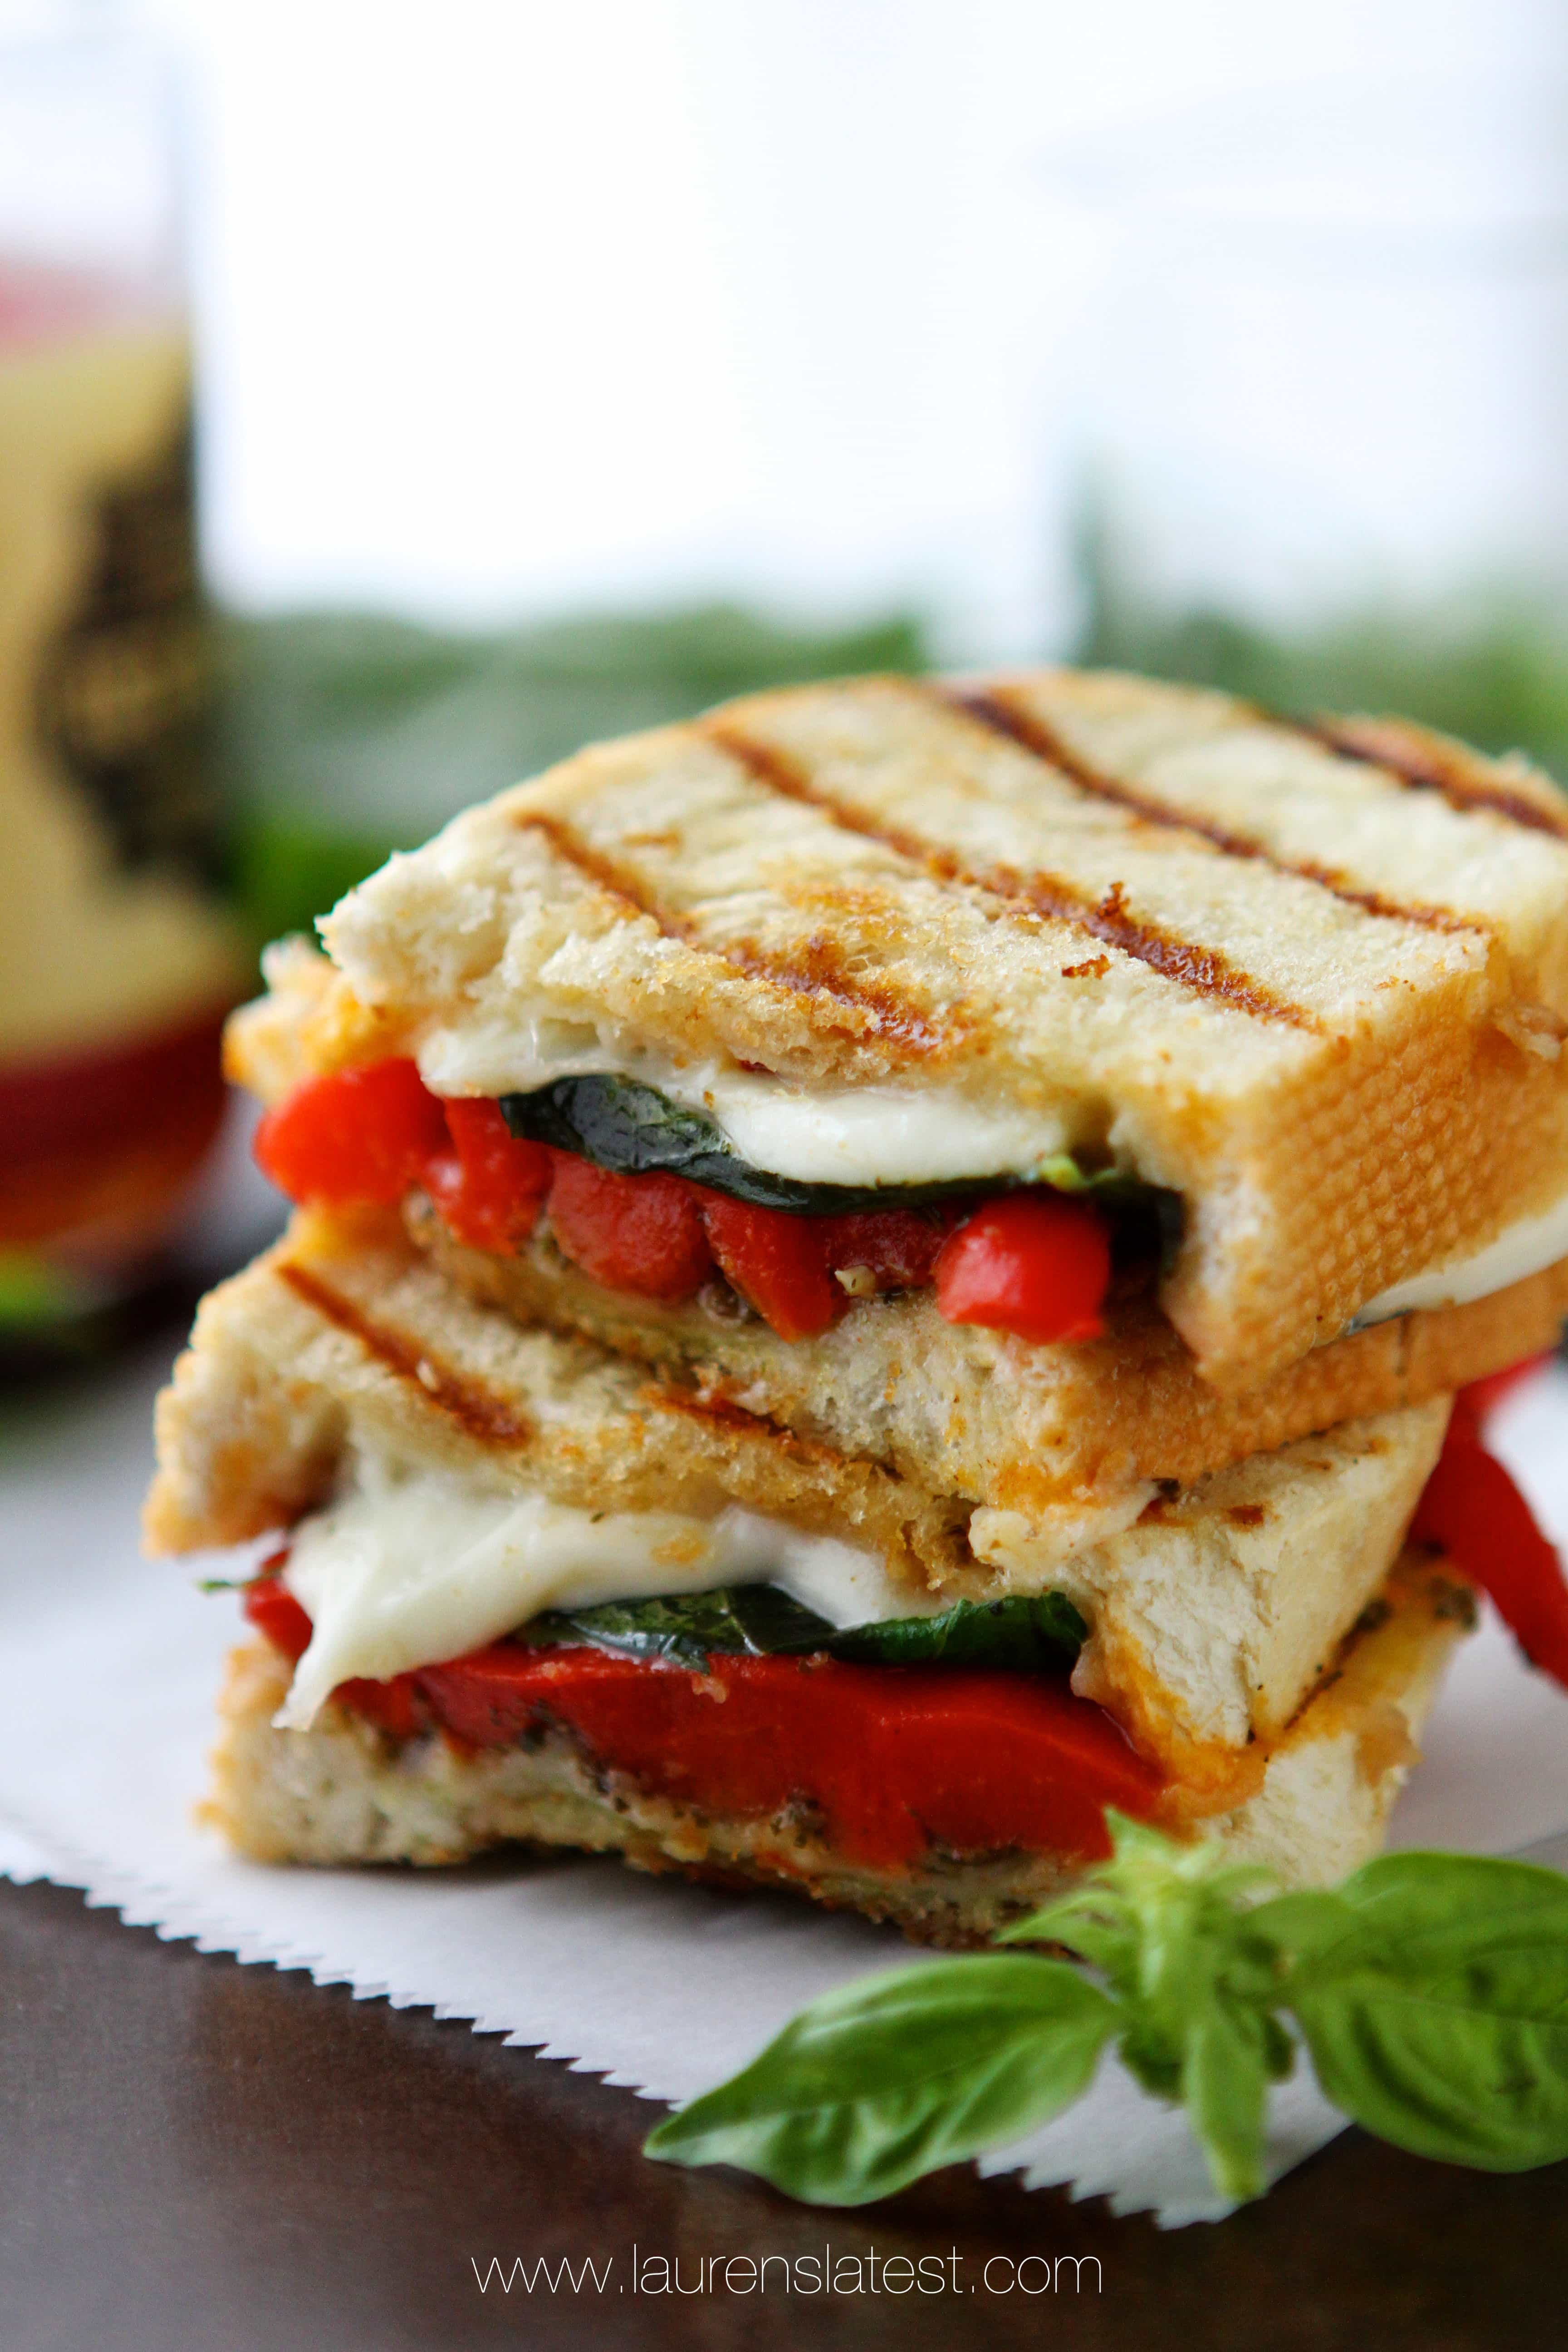  Roasted Red Pepper and Pesto Grilled Cheese Sandwich